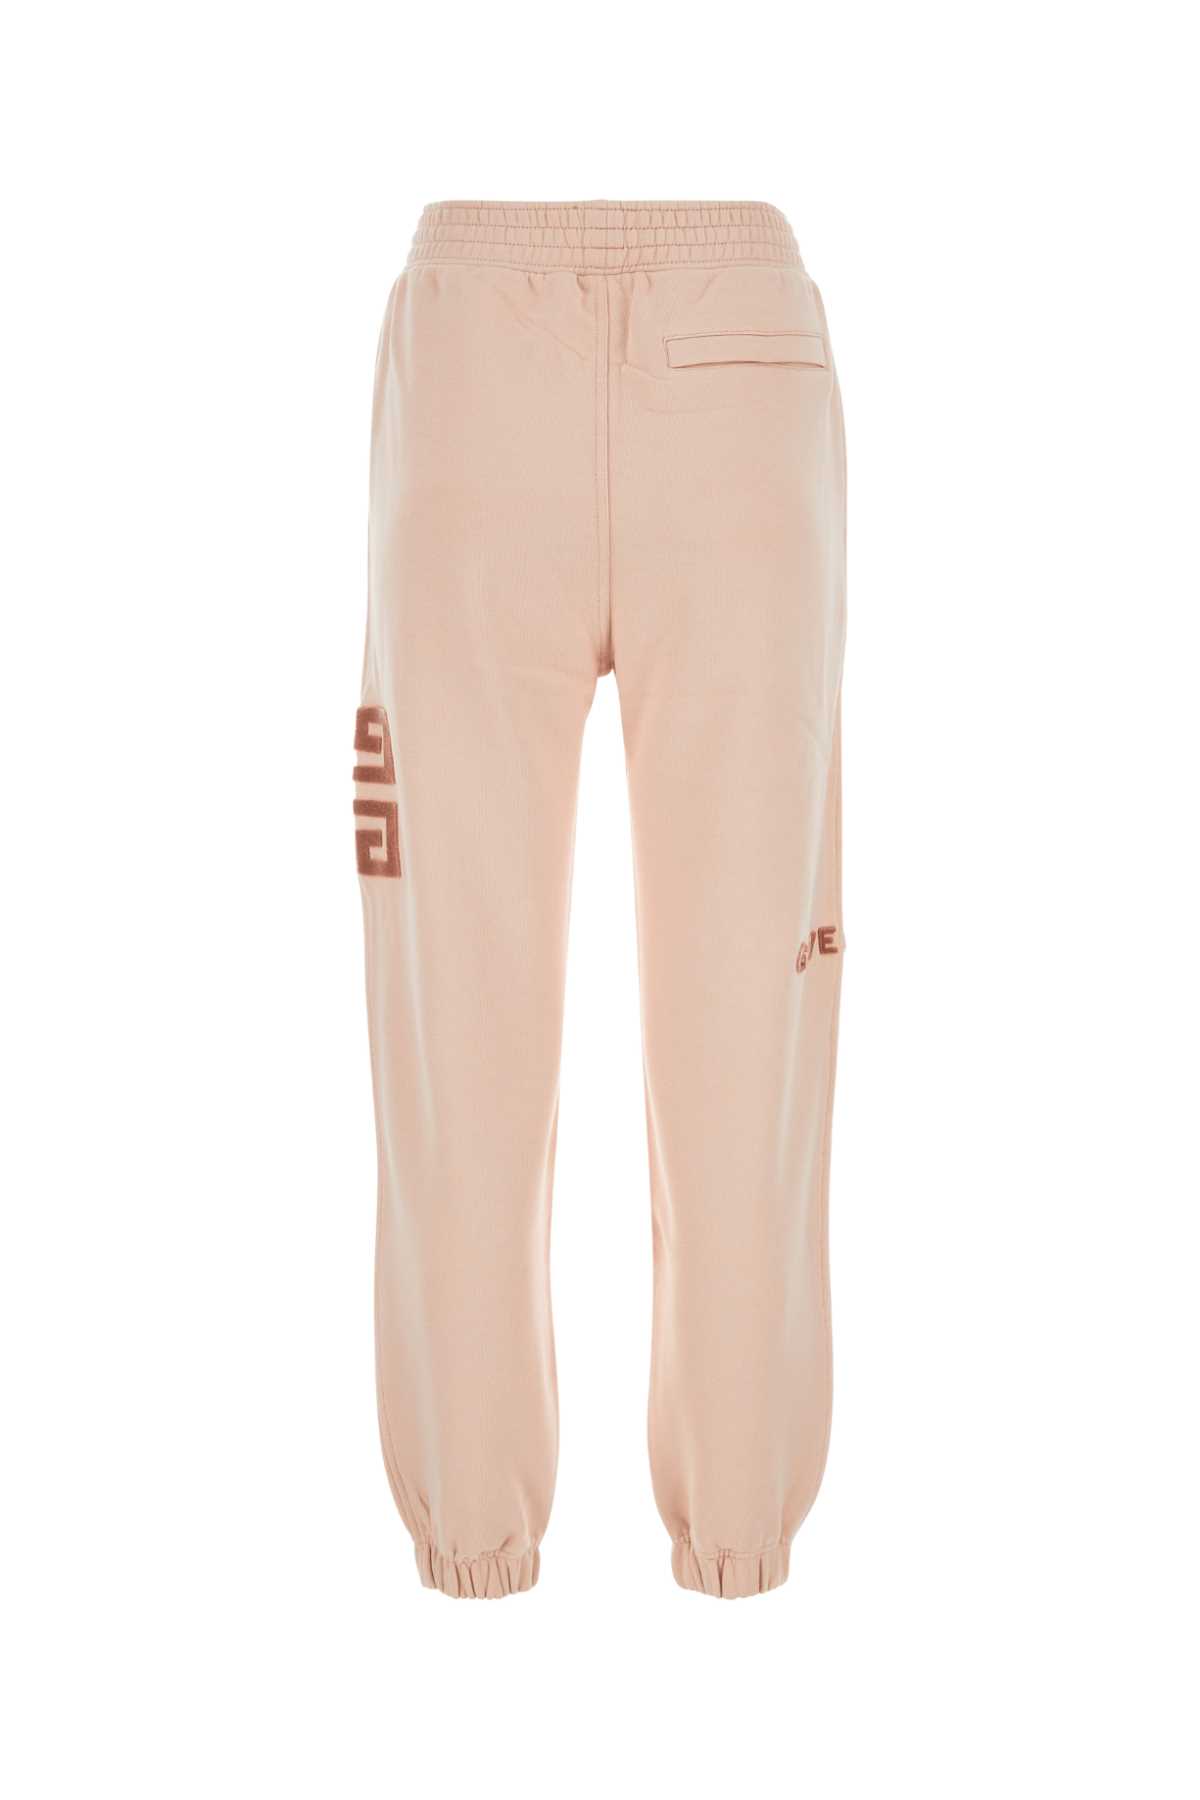 Givenchy Pink Cotton Joggers In Blushpink